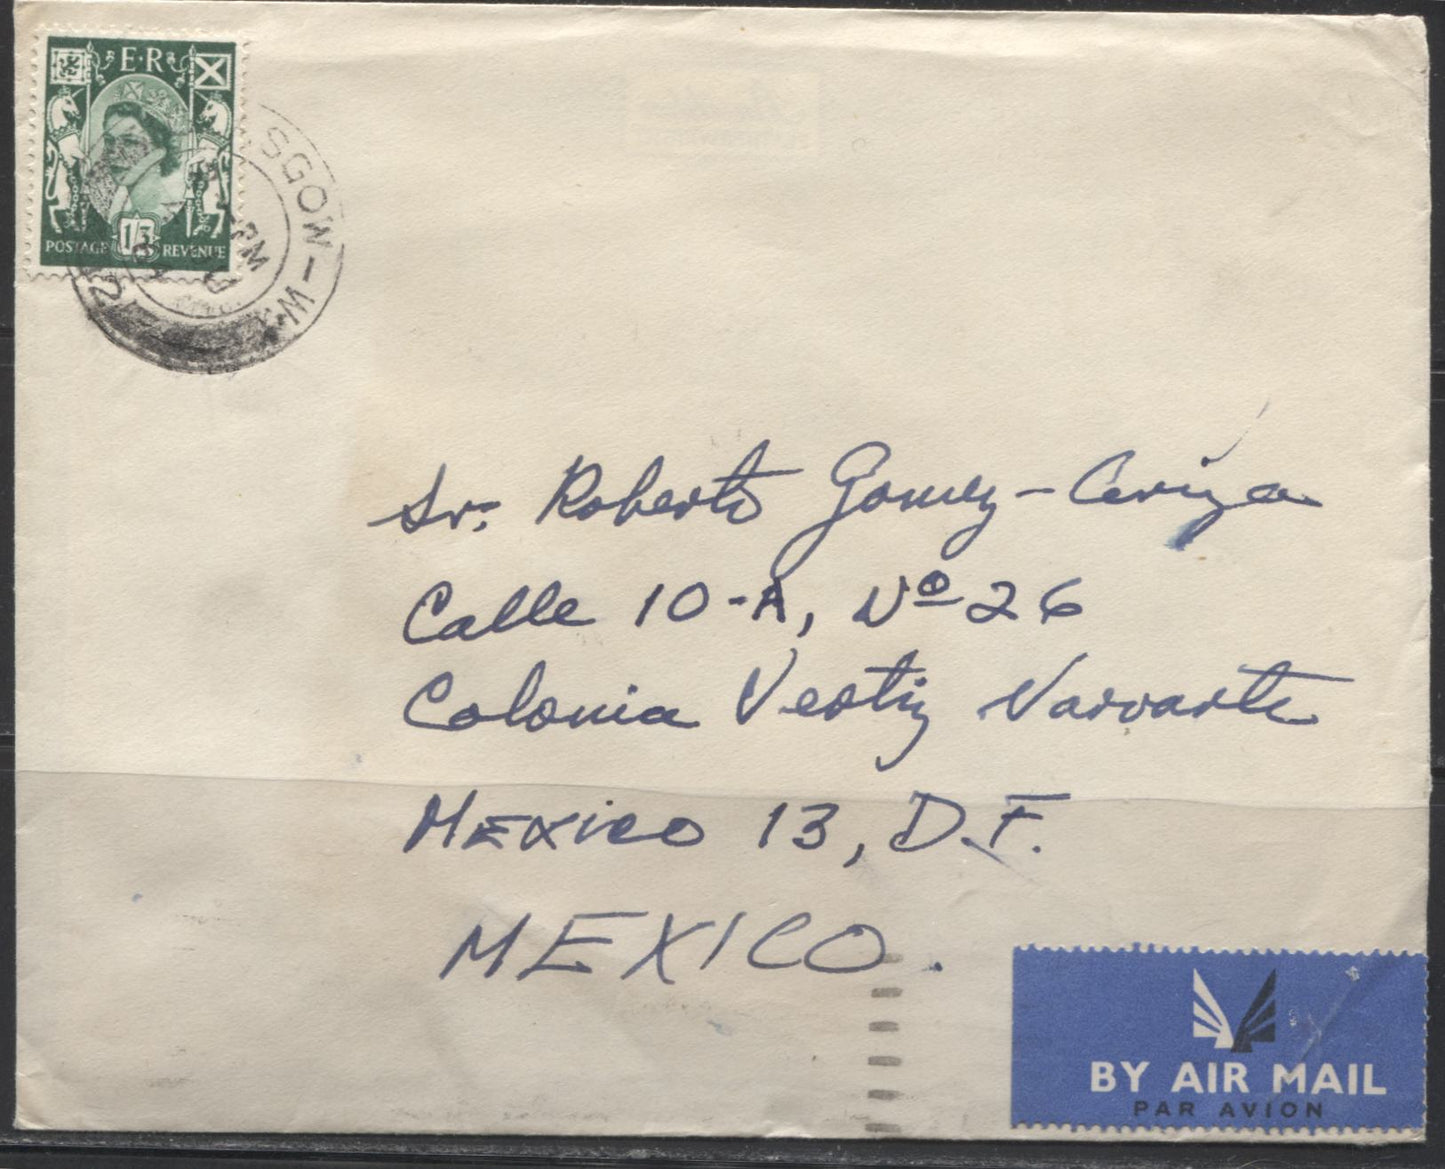 Great Britain (Scotland) #S5 1/3d Green Queen Elizabeth II, 1958-67 Wilding Issue, Multiple Crown Watermark, A Single Usage on a Very Fine Cover to Mexico, With Enclosure, August 4, 1964